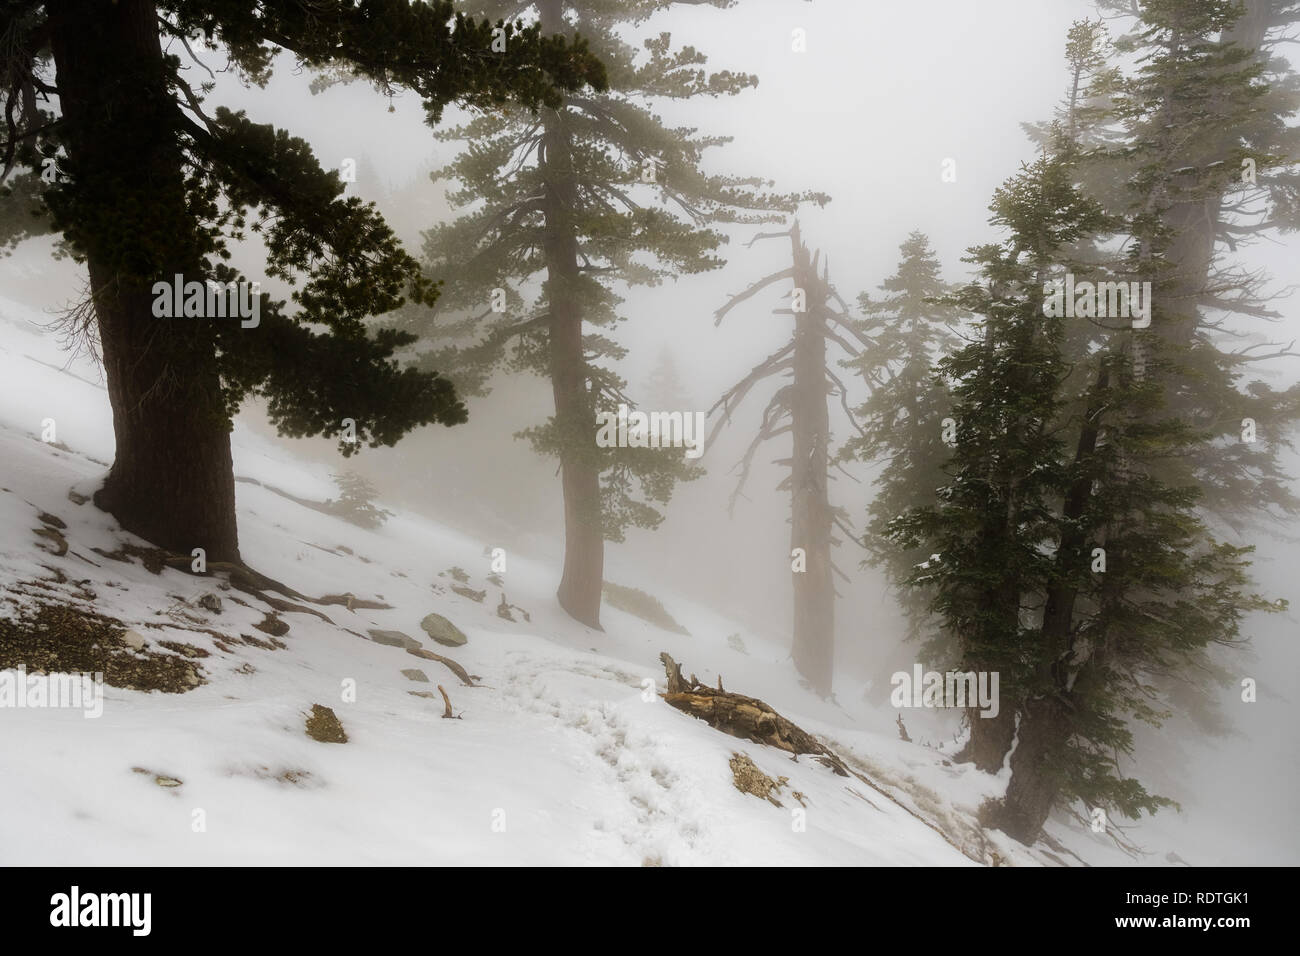 Low visibility on a day with heavy fog covering the forests of Mount San Antonio (Mt Baldy), Los Angeles county, California Stock Photo